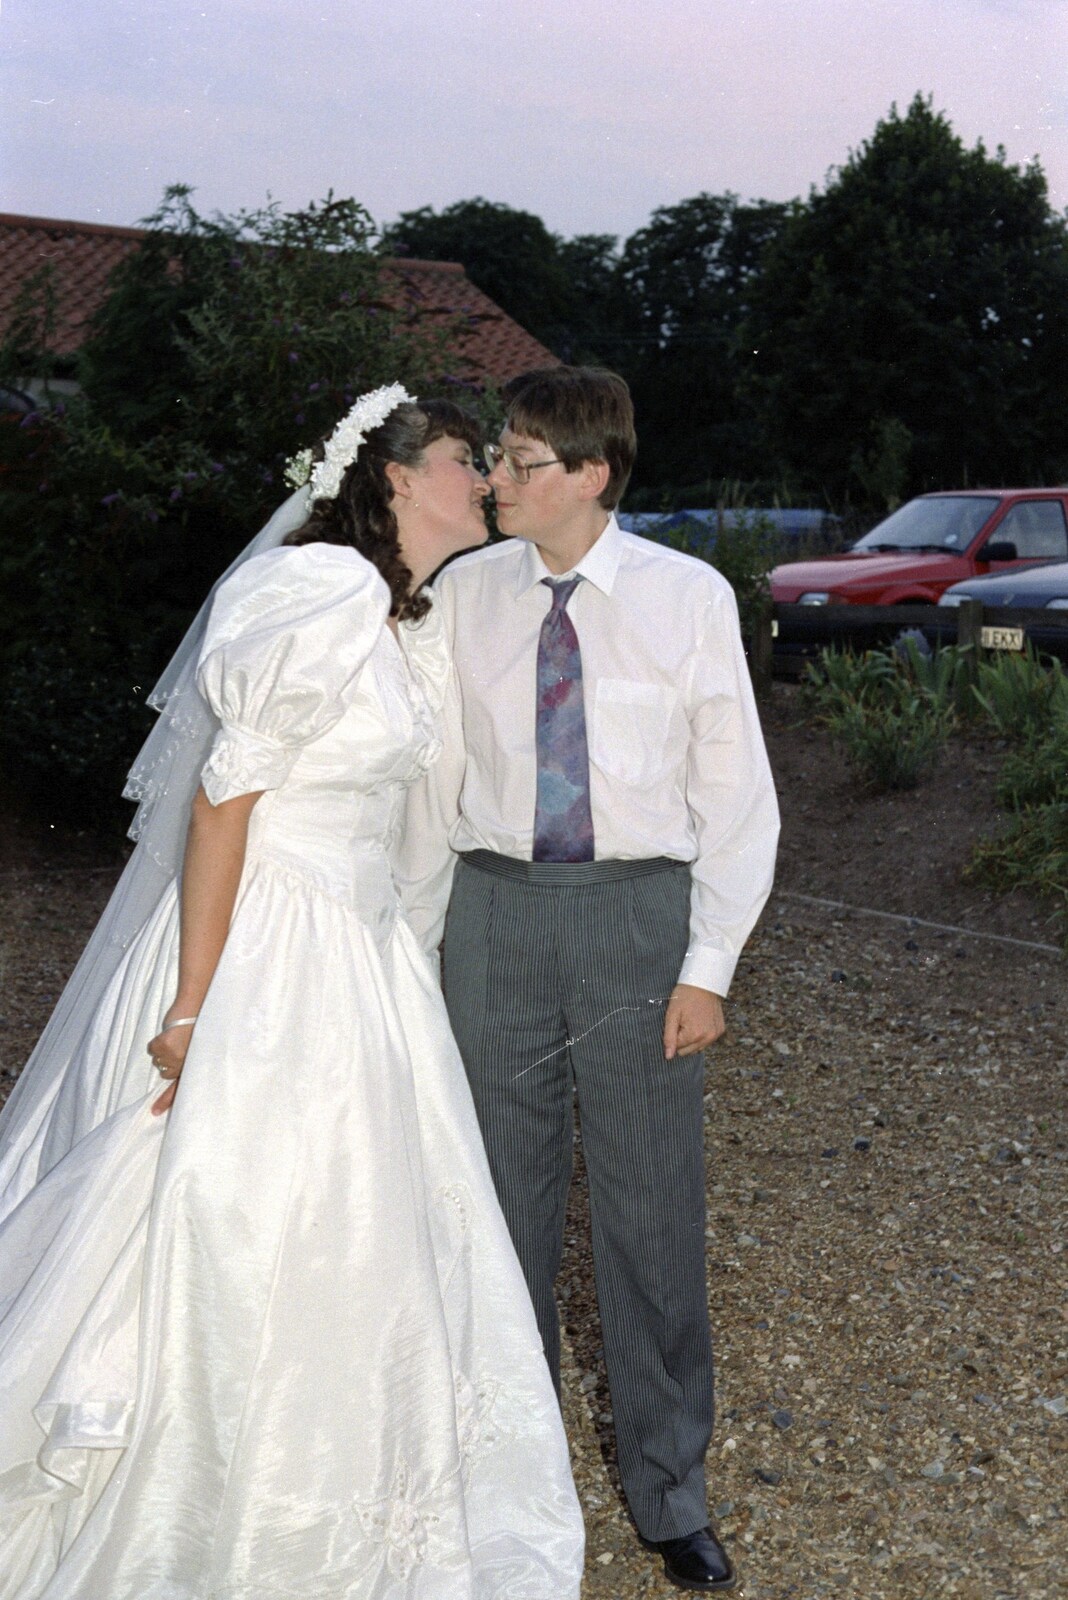 Time for a kiss from Tone's Wedding, Mundford, Norfolk - 27th August 1994